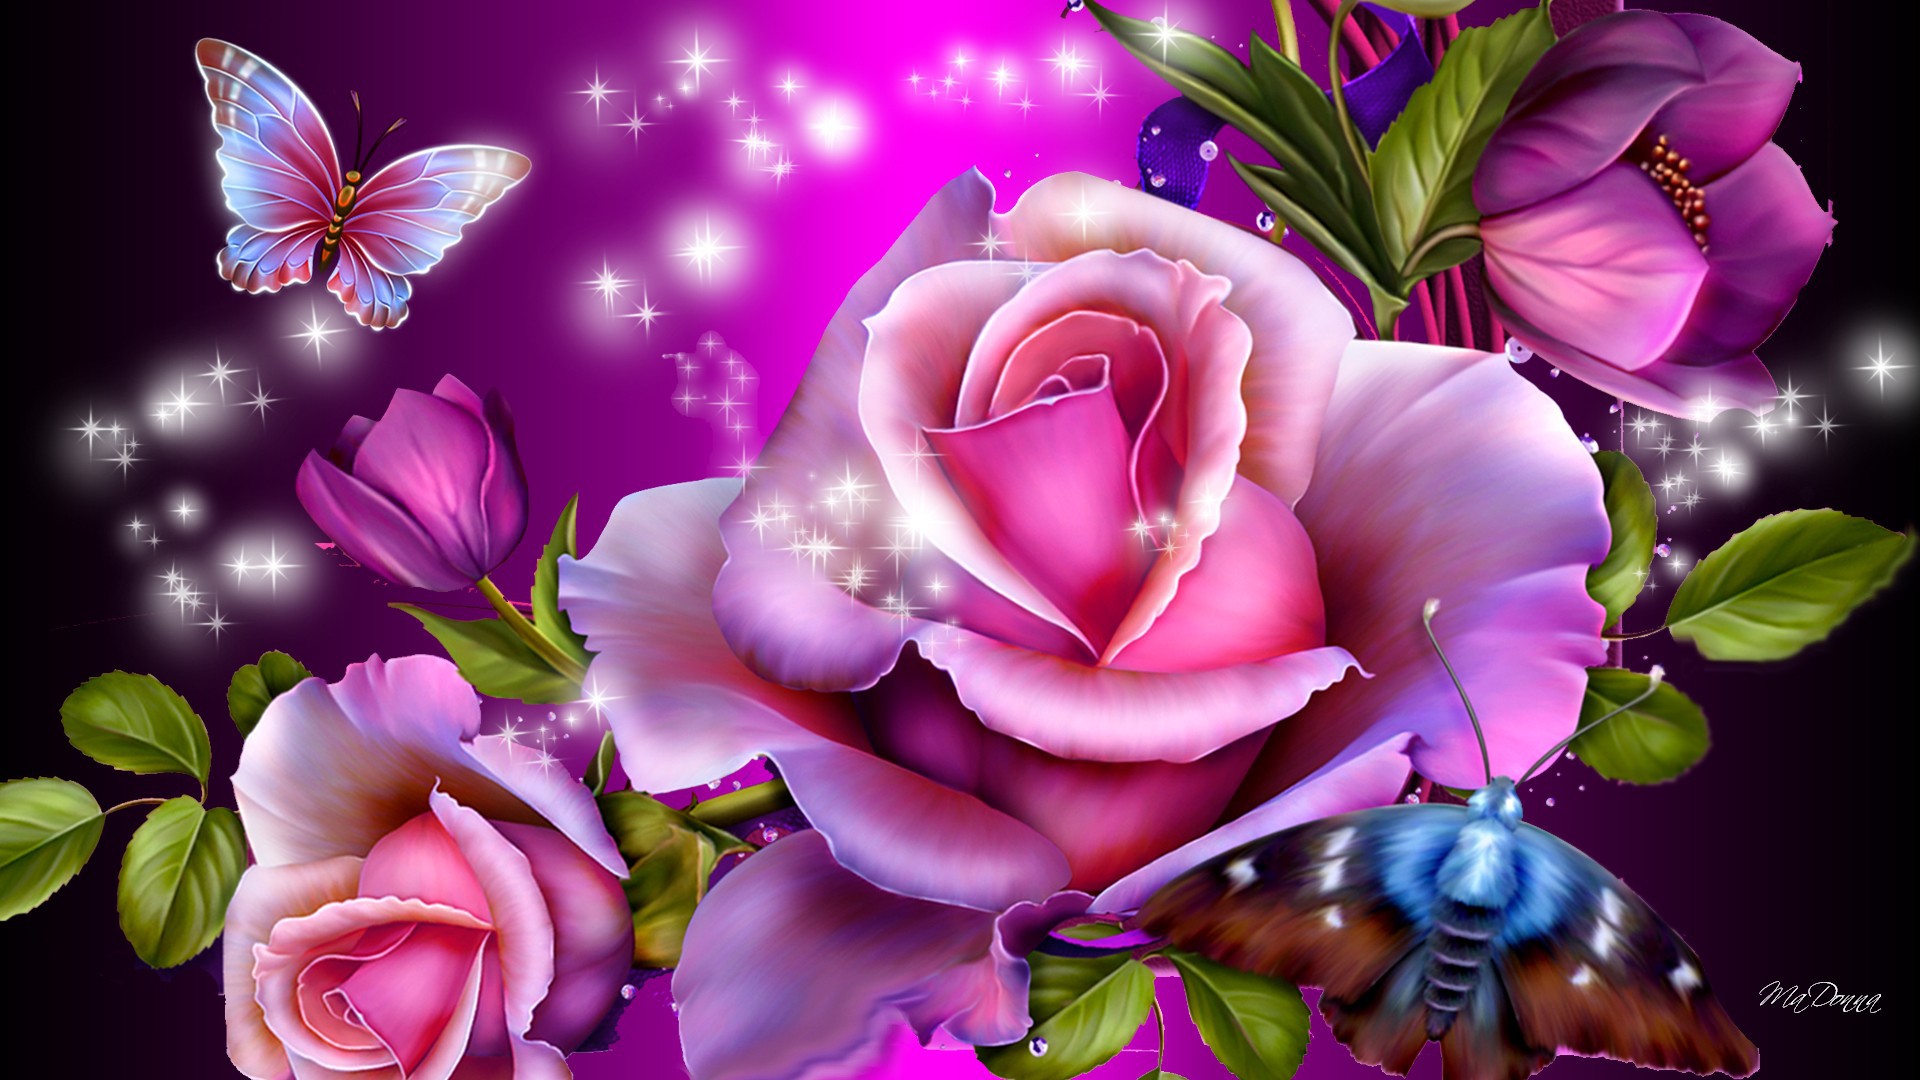 Butterflies And Roses Wallpaper On